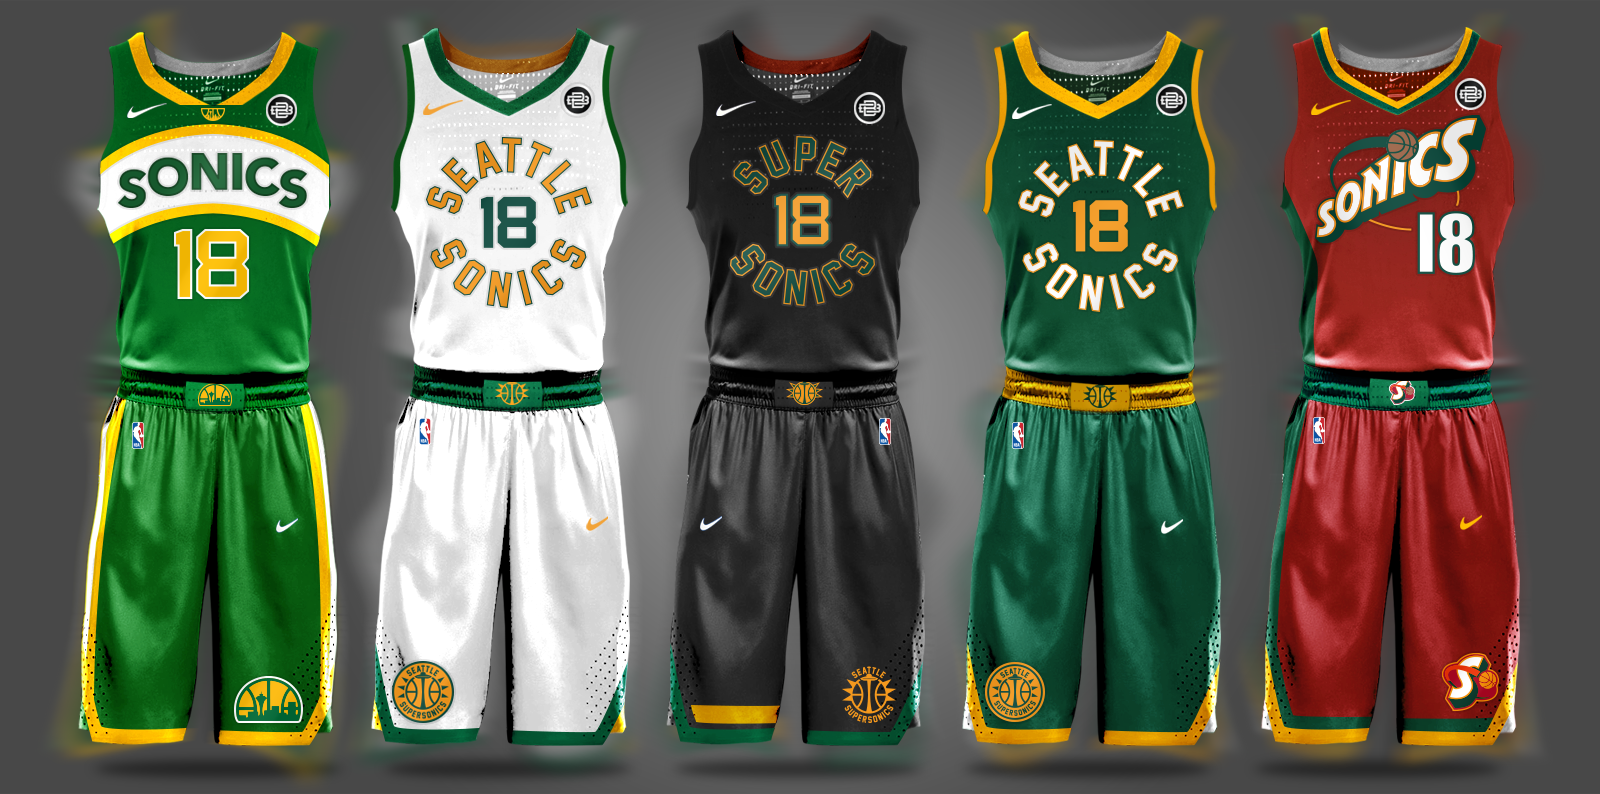 The 22 Amazing Jerseys Concepts For The NBA's Together For Change